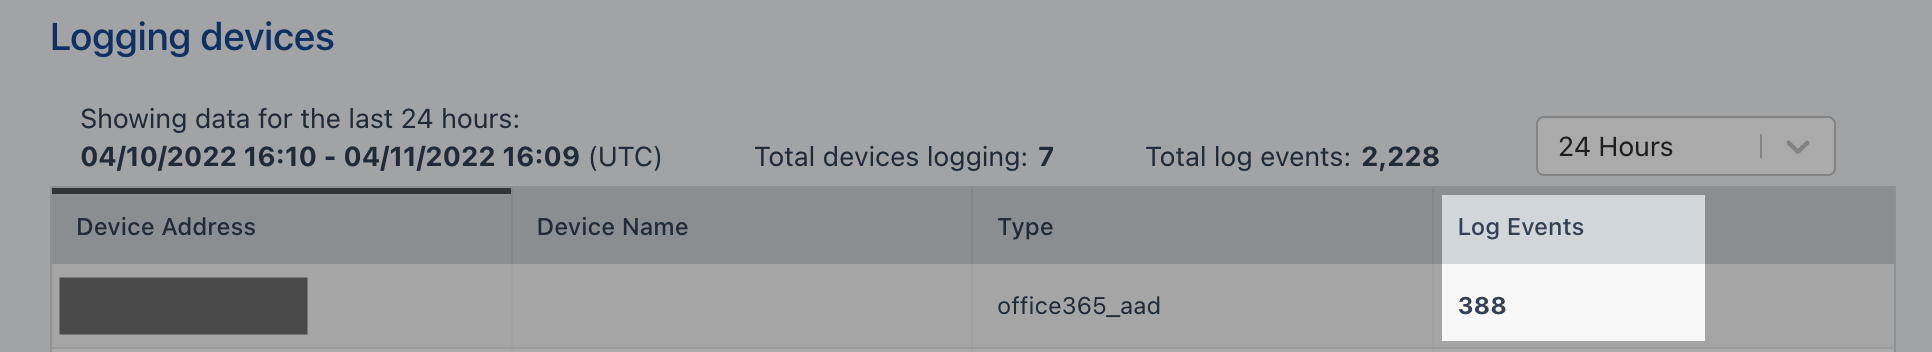 logging_devices.png